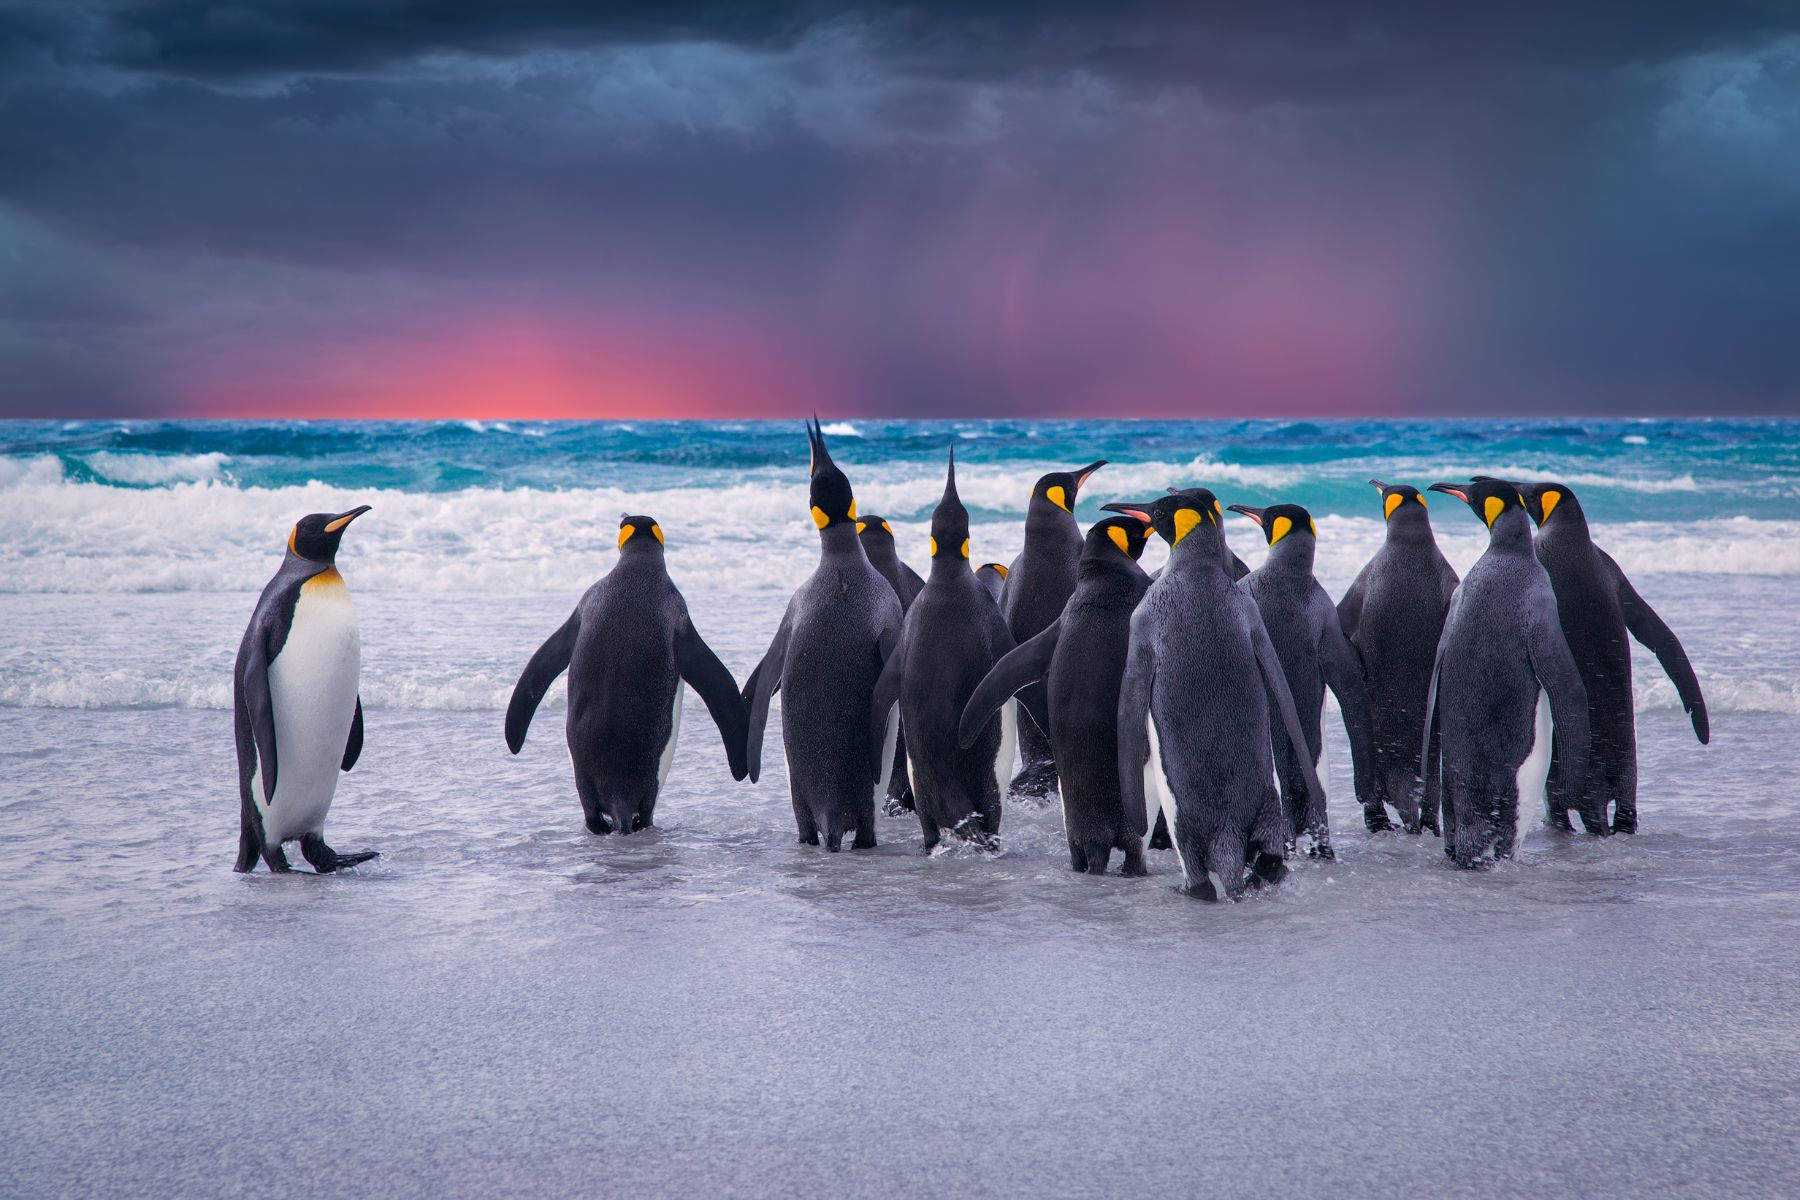 King Penquins at a beach in the Falkland Islands